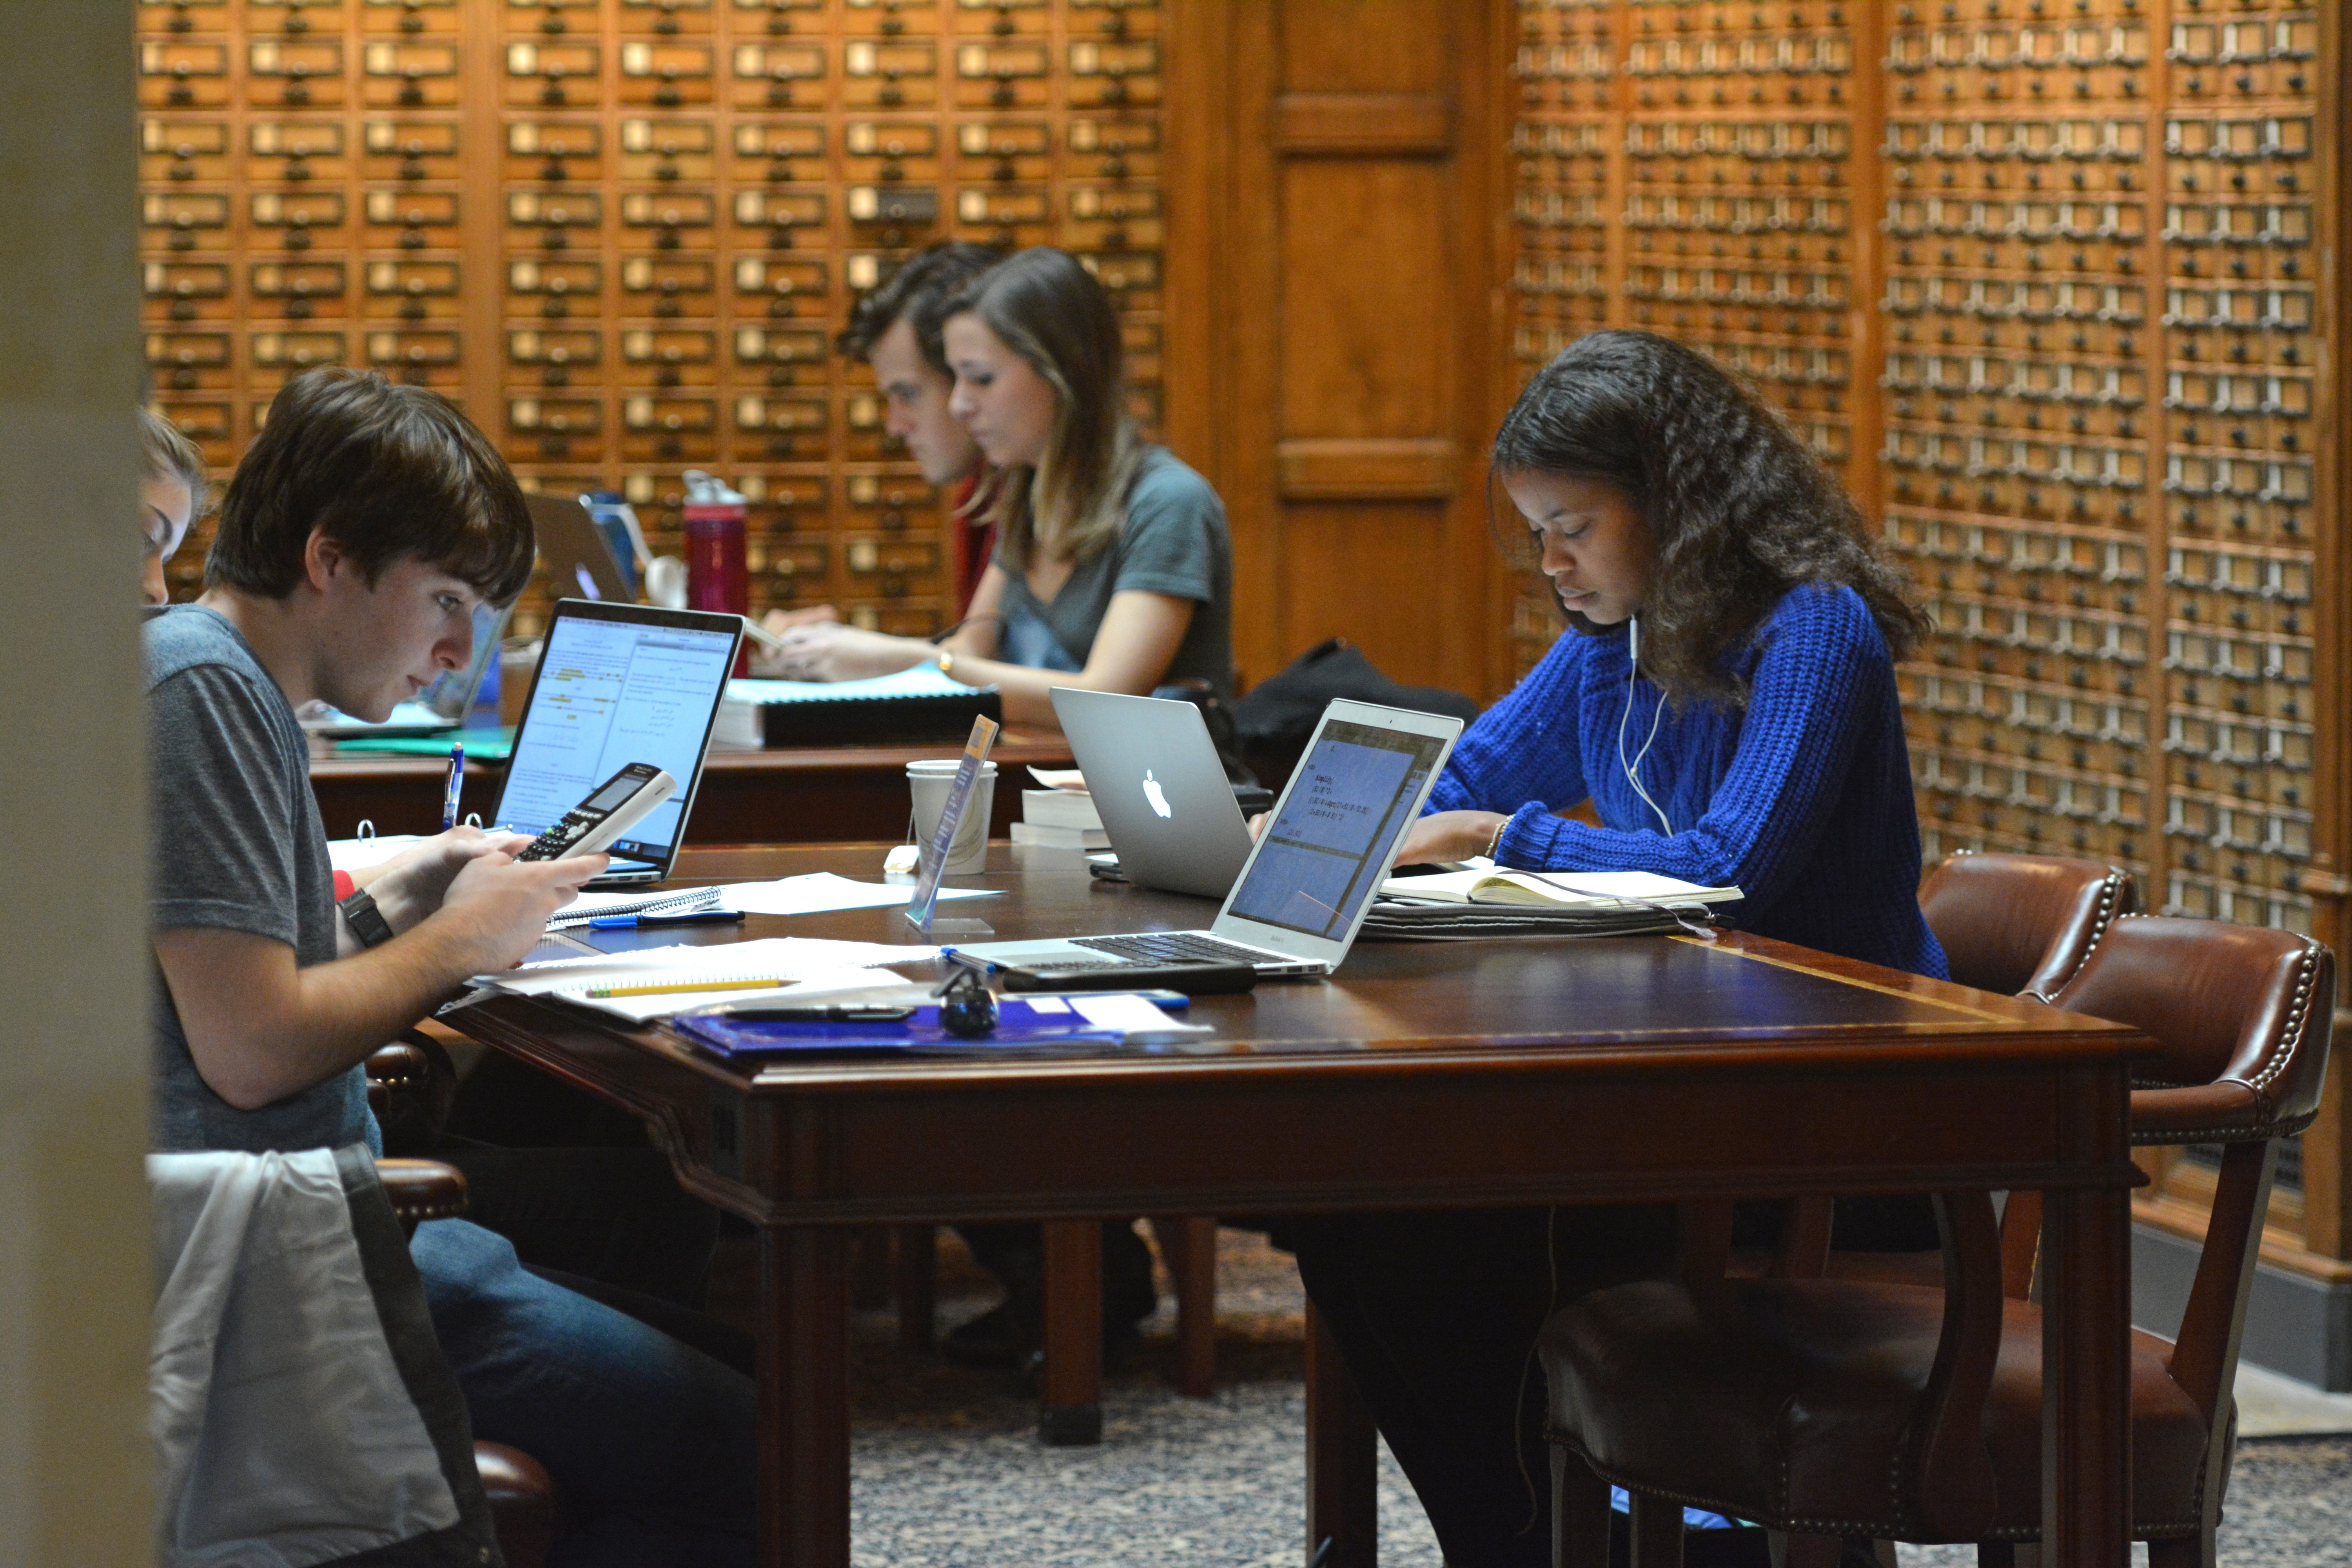 Students with laptops studying at library tables, background of card catalogs